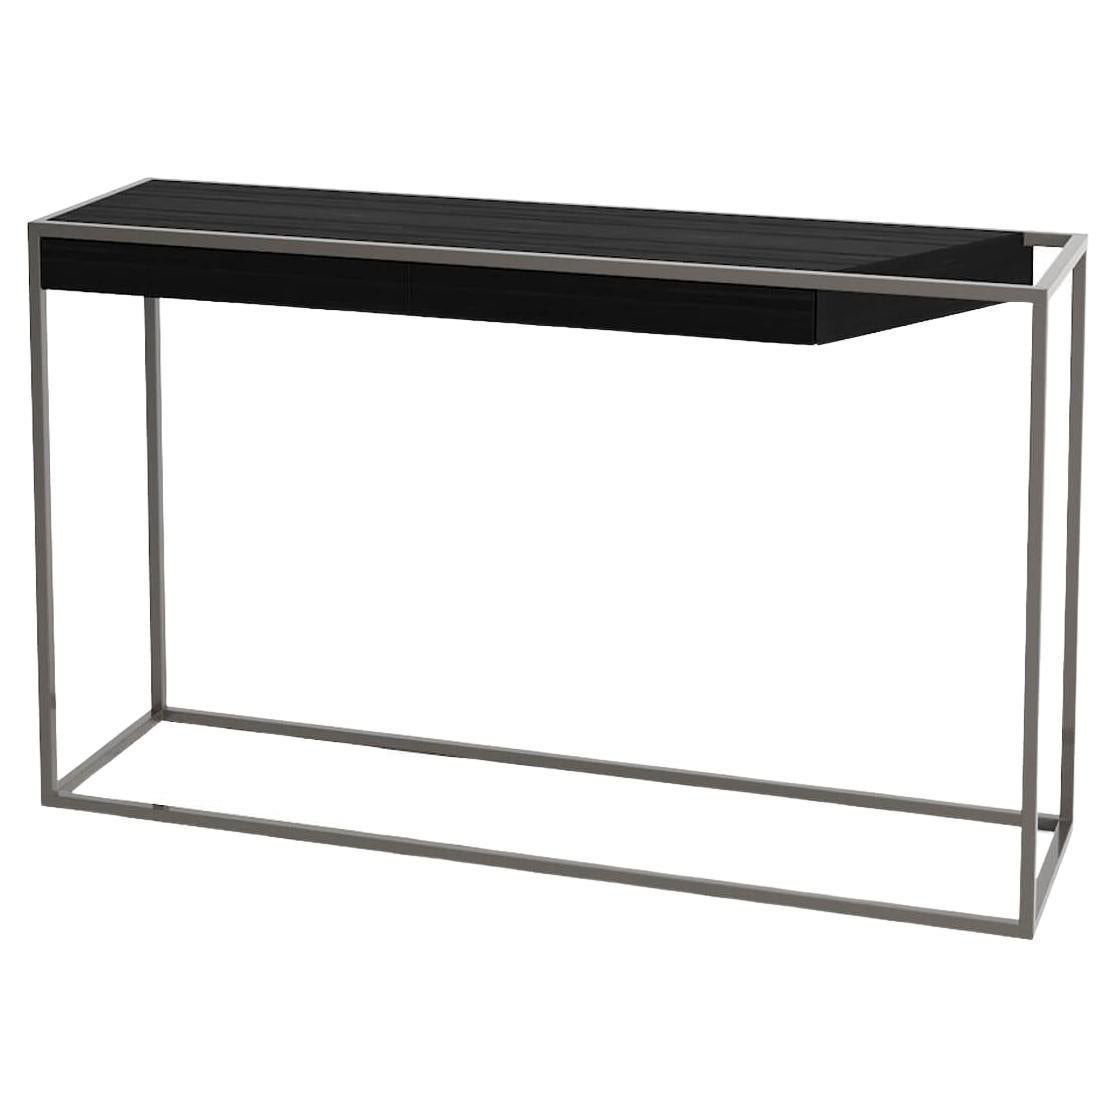 Modern Minimalist Rectangular Console Table Black Oak Wood and Black Lacquer